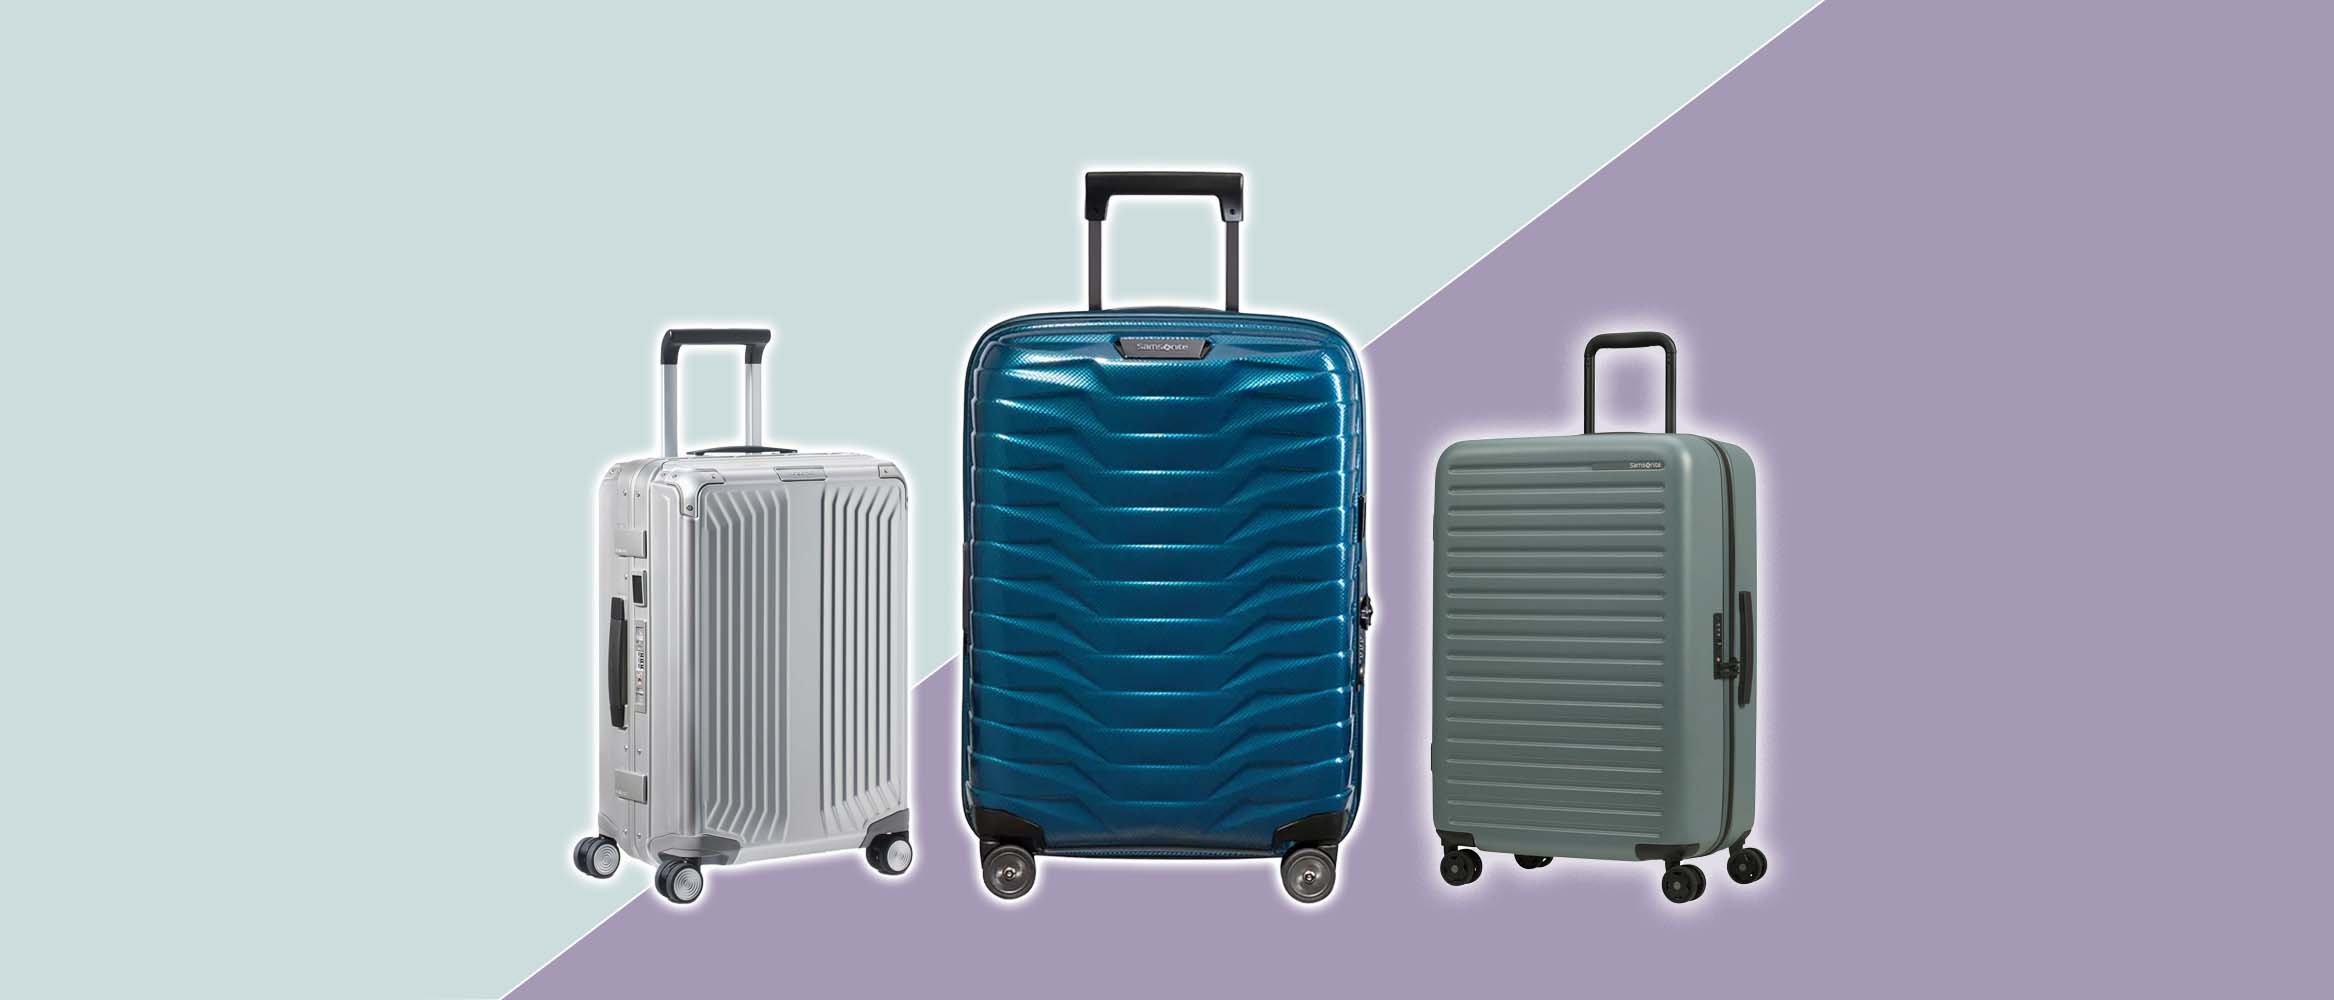 Best Luggage Accessories Personalize Your Suitcase to Avoid Losing It   Rolling Stone